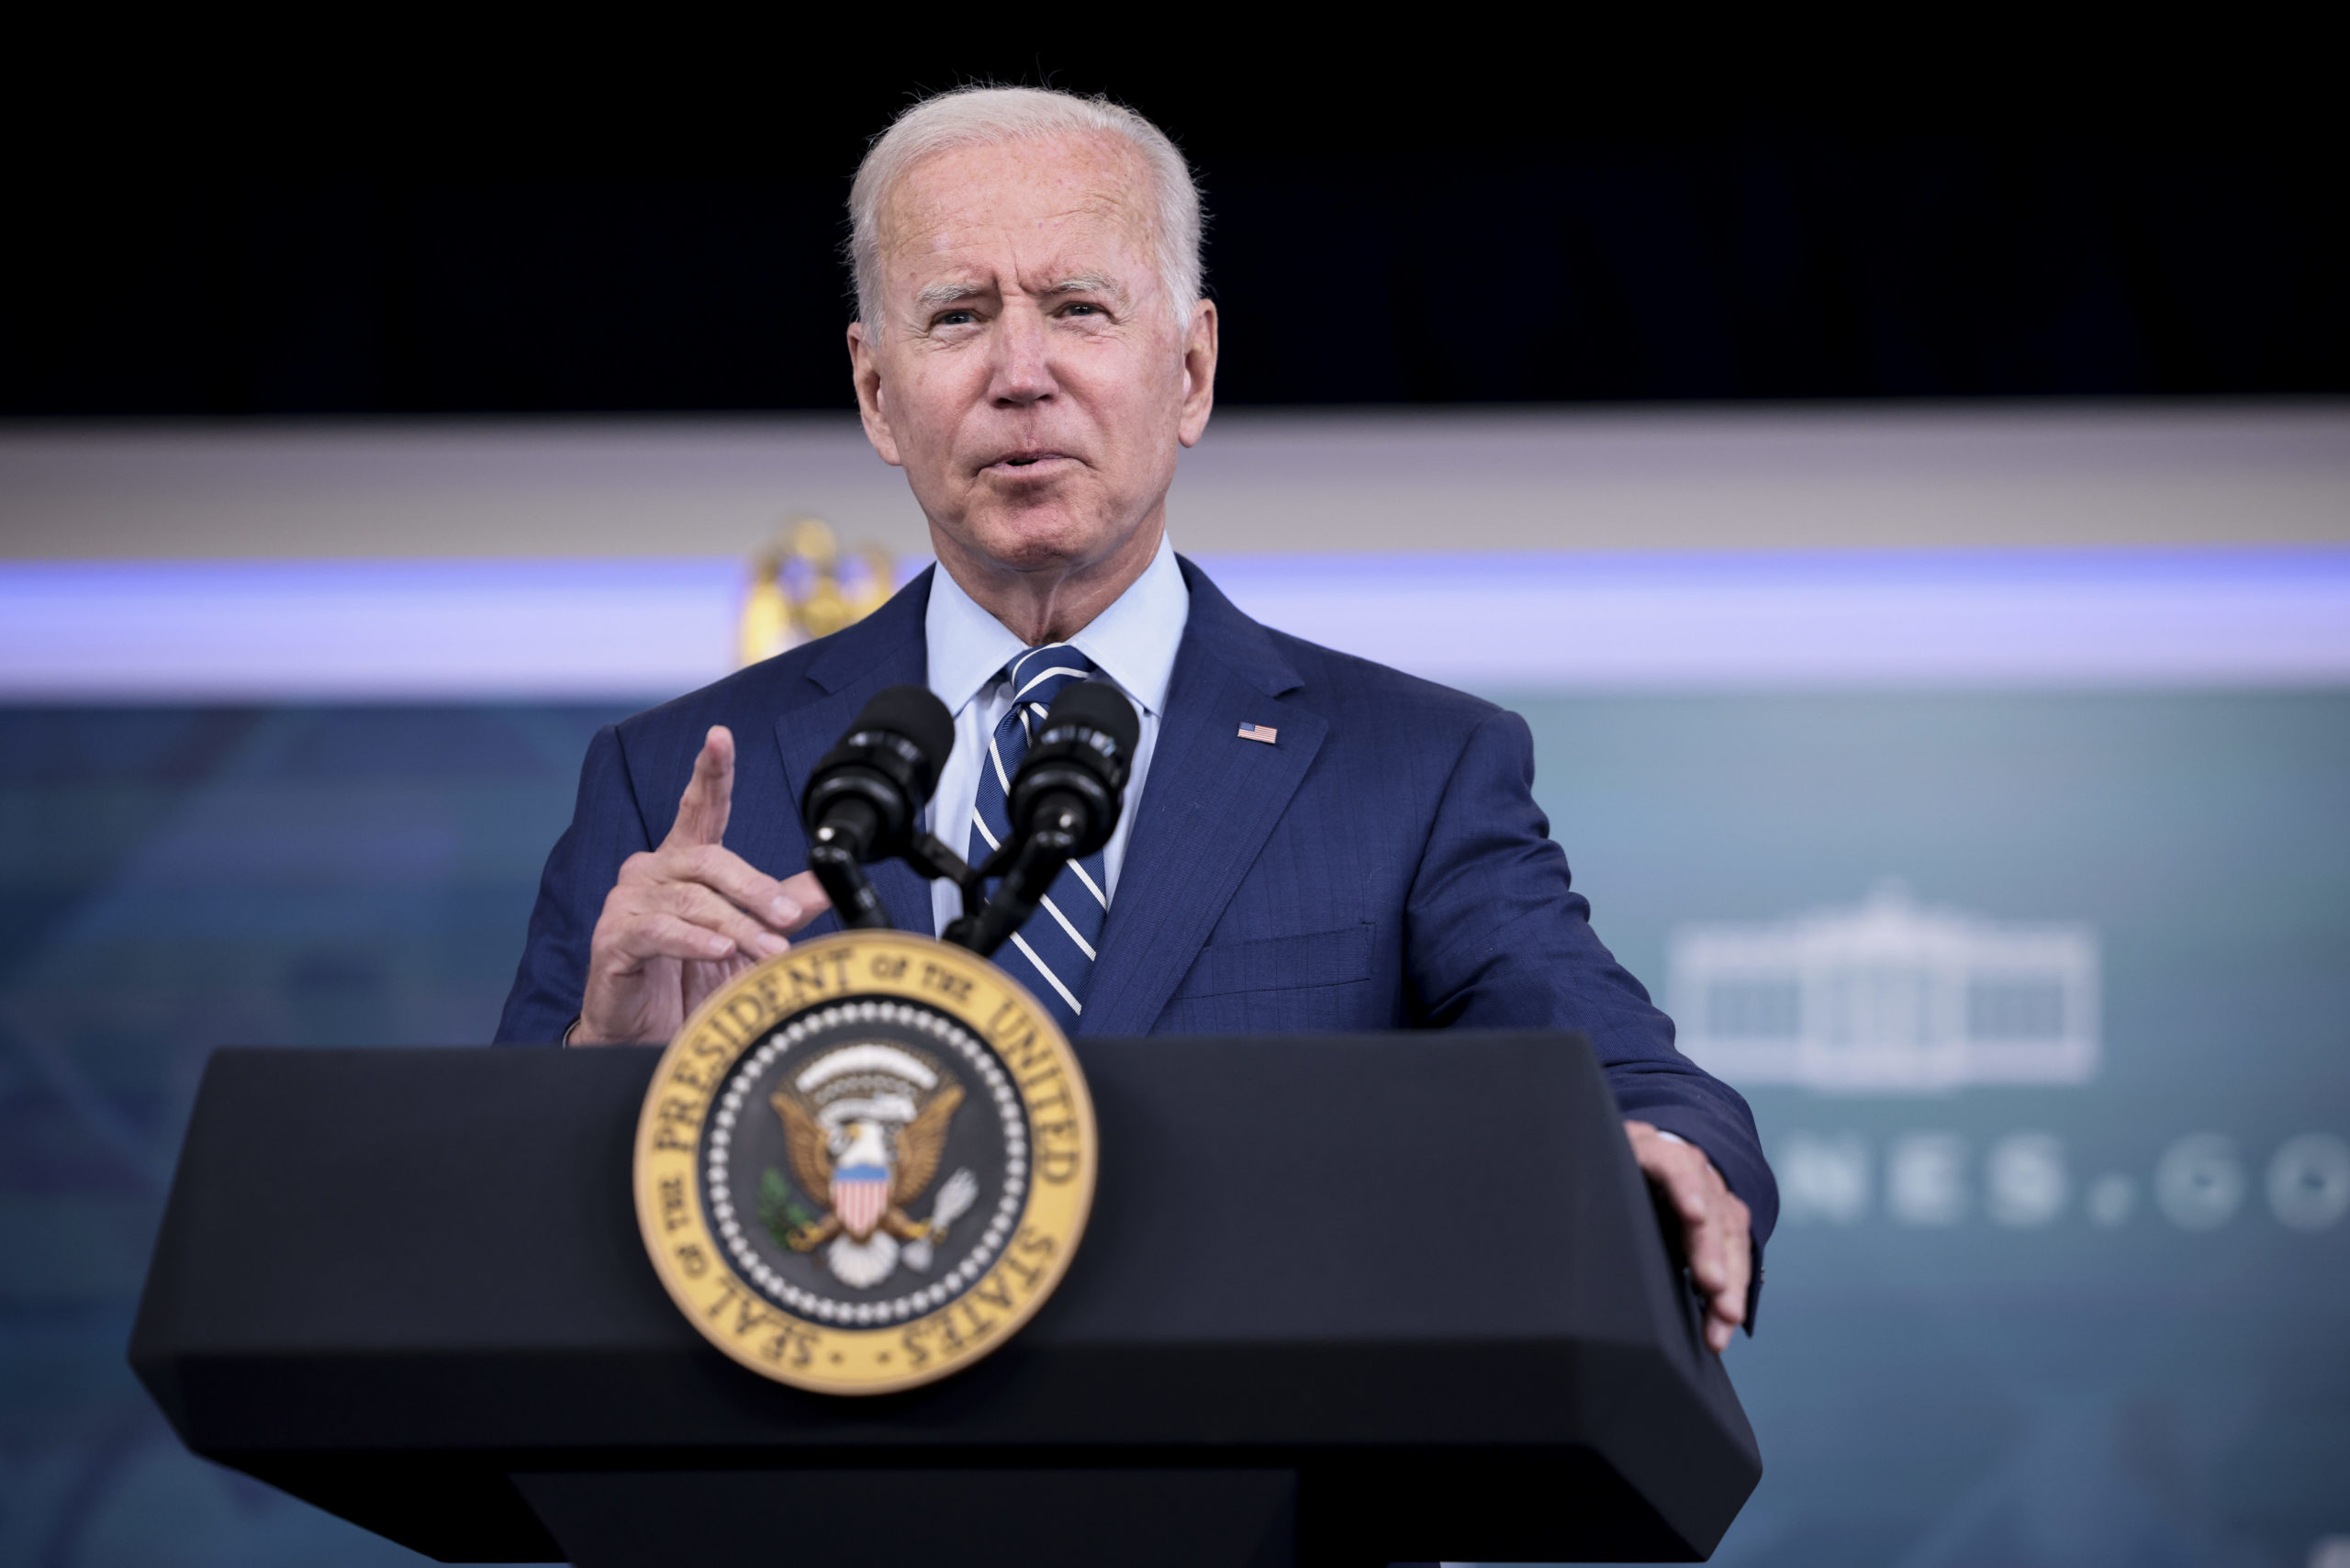 How Biden’s economic plan compares to the Great Society and New Deal